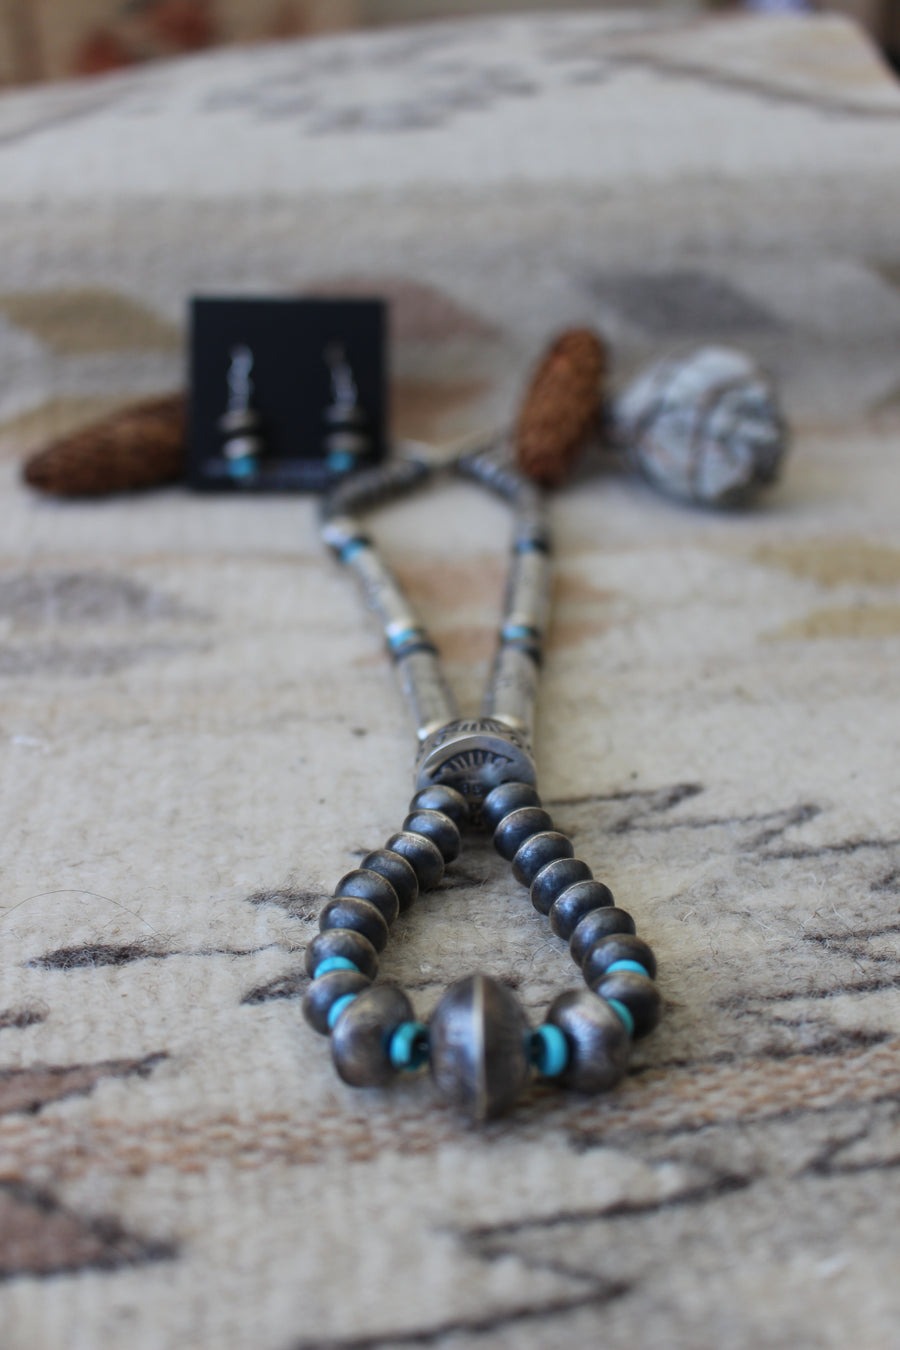 Turquoise Waters Necklace